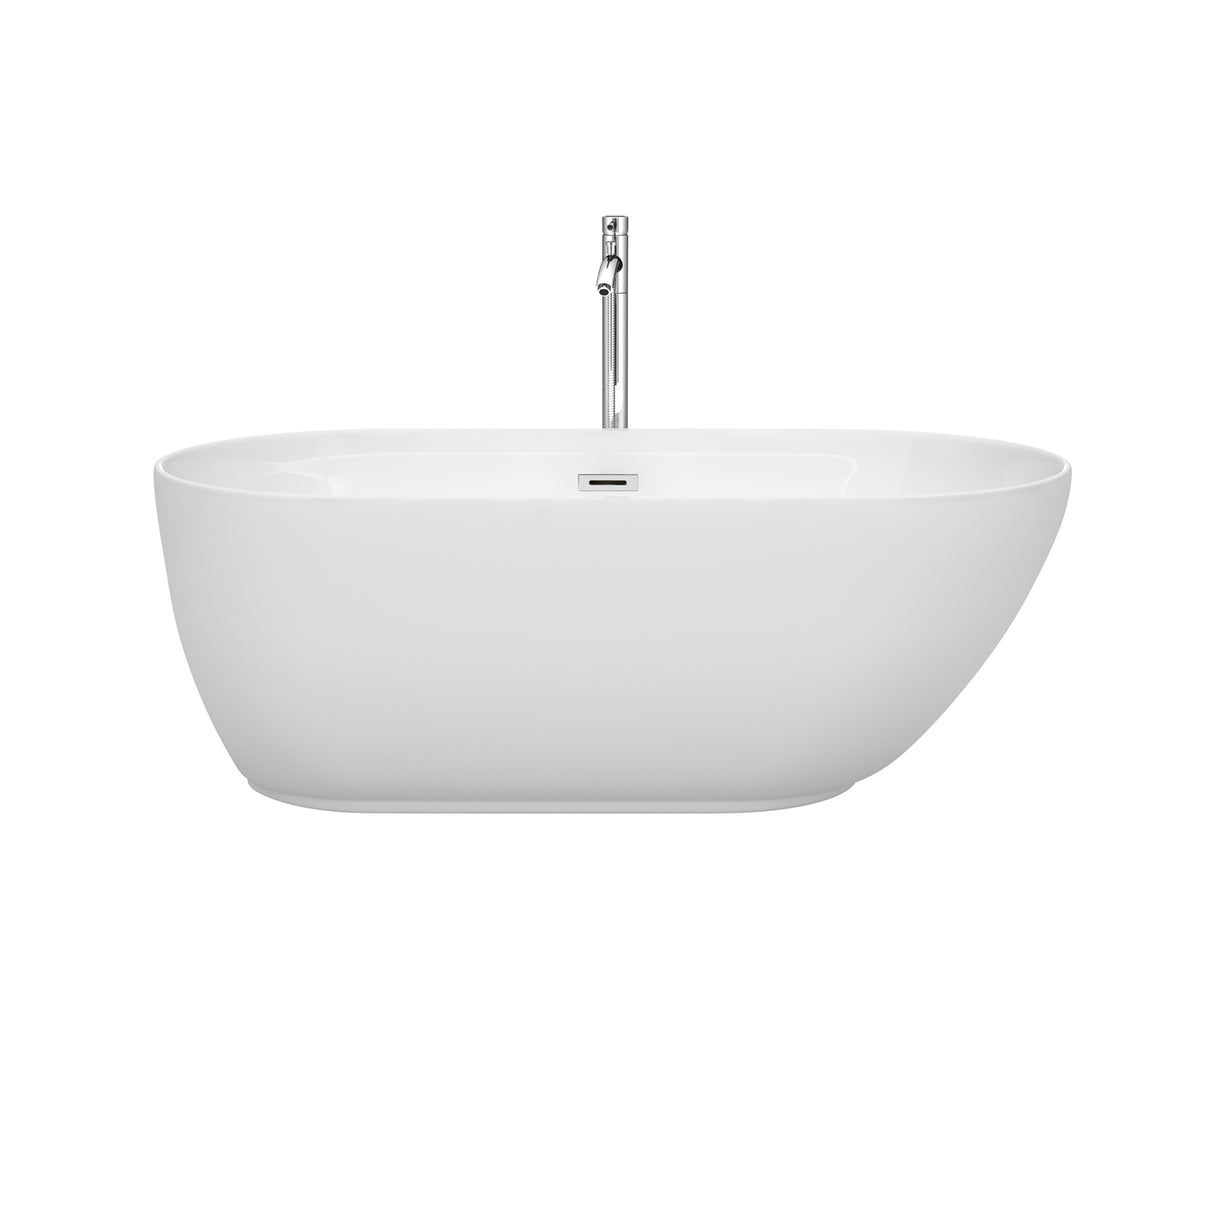 Melissa 60 Inch Freestanding Bathtub in White with Floor Mounted Faucet Drain and Overflow Trim in Polished Chrome